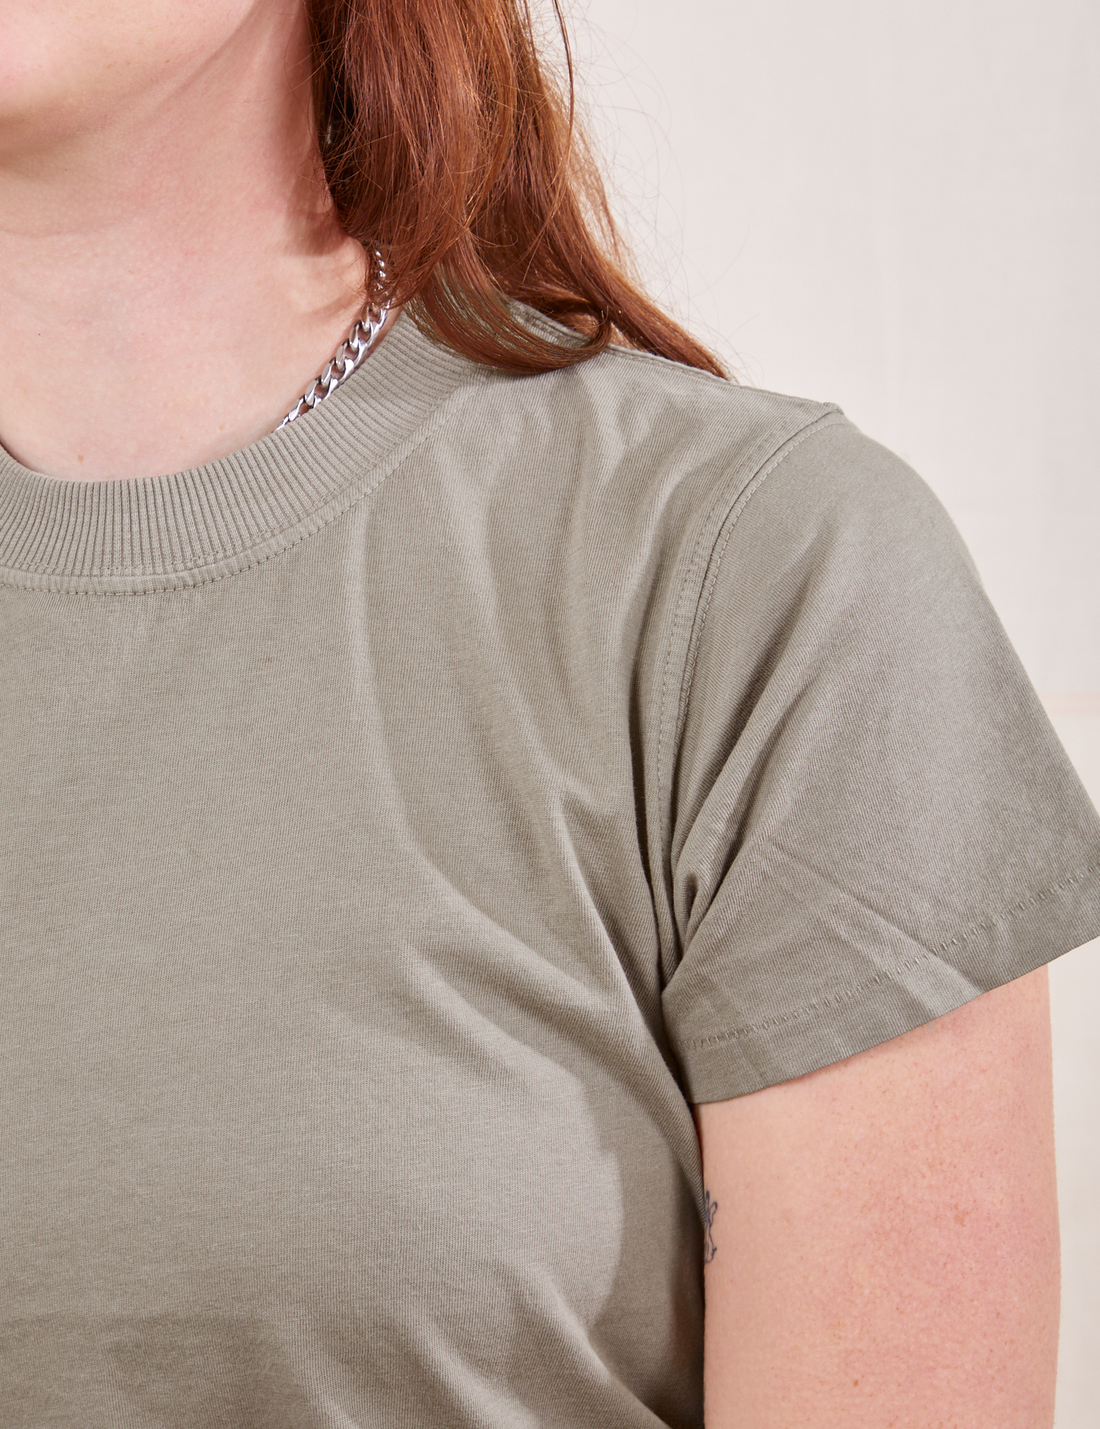 The Organic Vintage Tee in Khaki Grey front close up on Alex